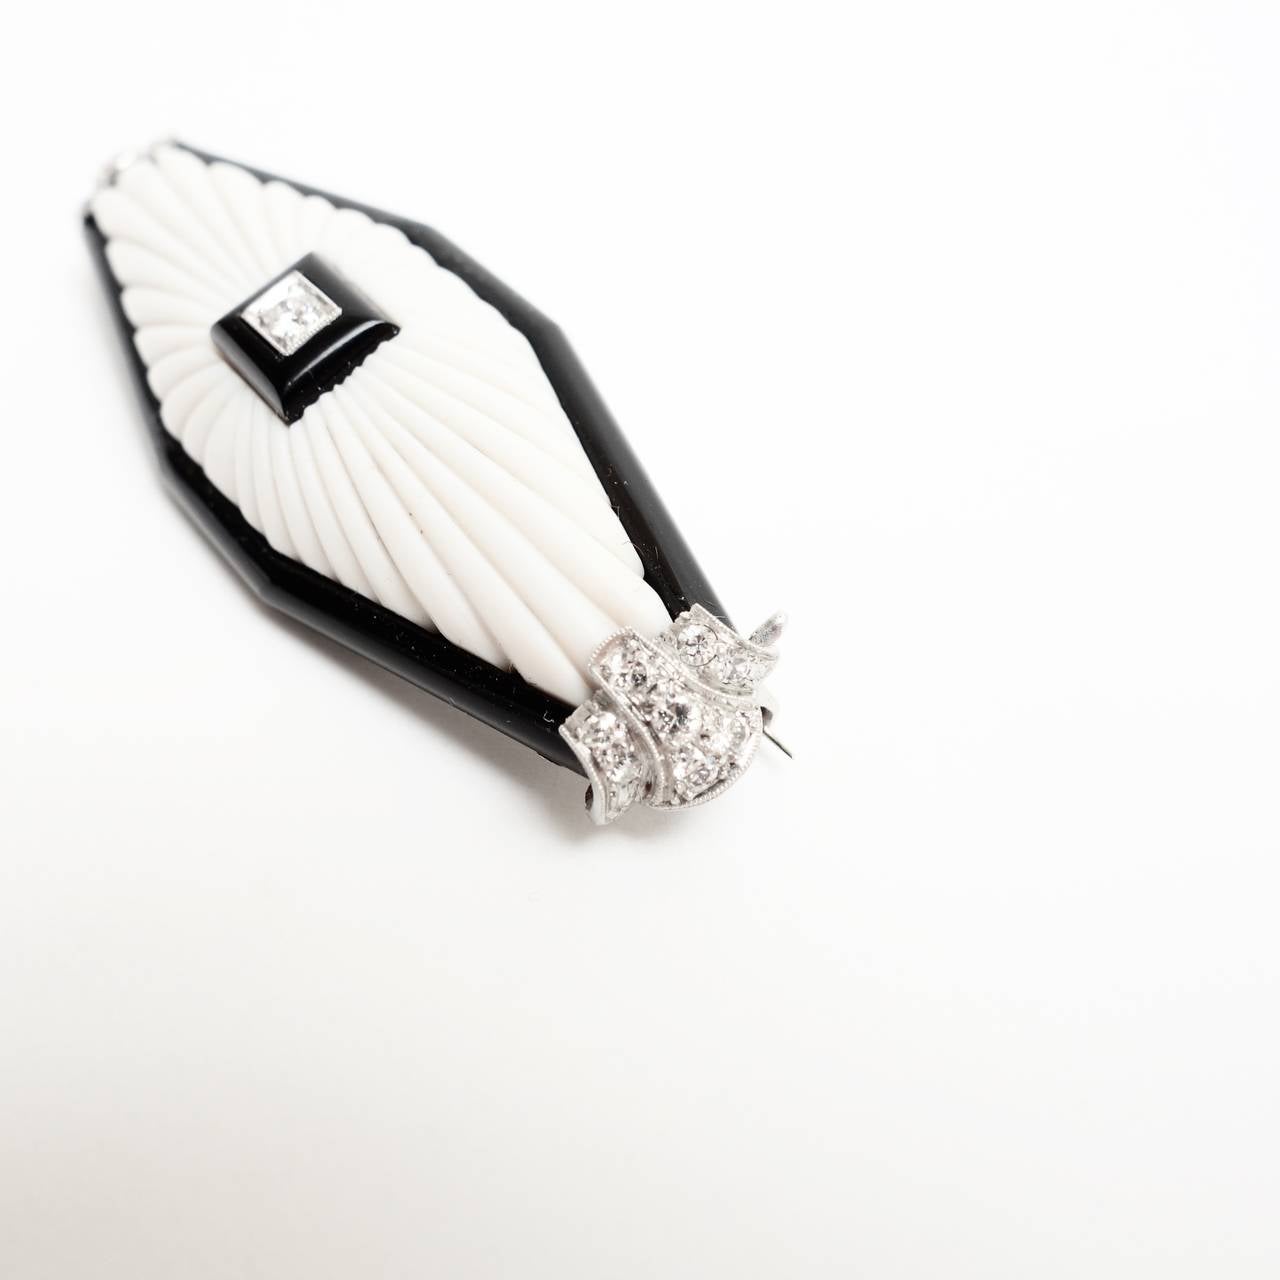 Amazing white coral, black onyx and diamond brooch with 18K white gold and platinum.  Featuring an elongated hand carved white coral set with a diamond and black onyx center piece, framed by black onyx and two diamond set end pieces. All diamoonds